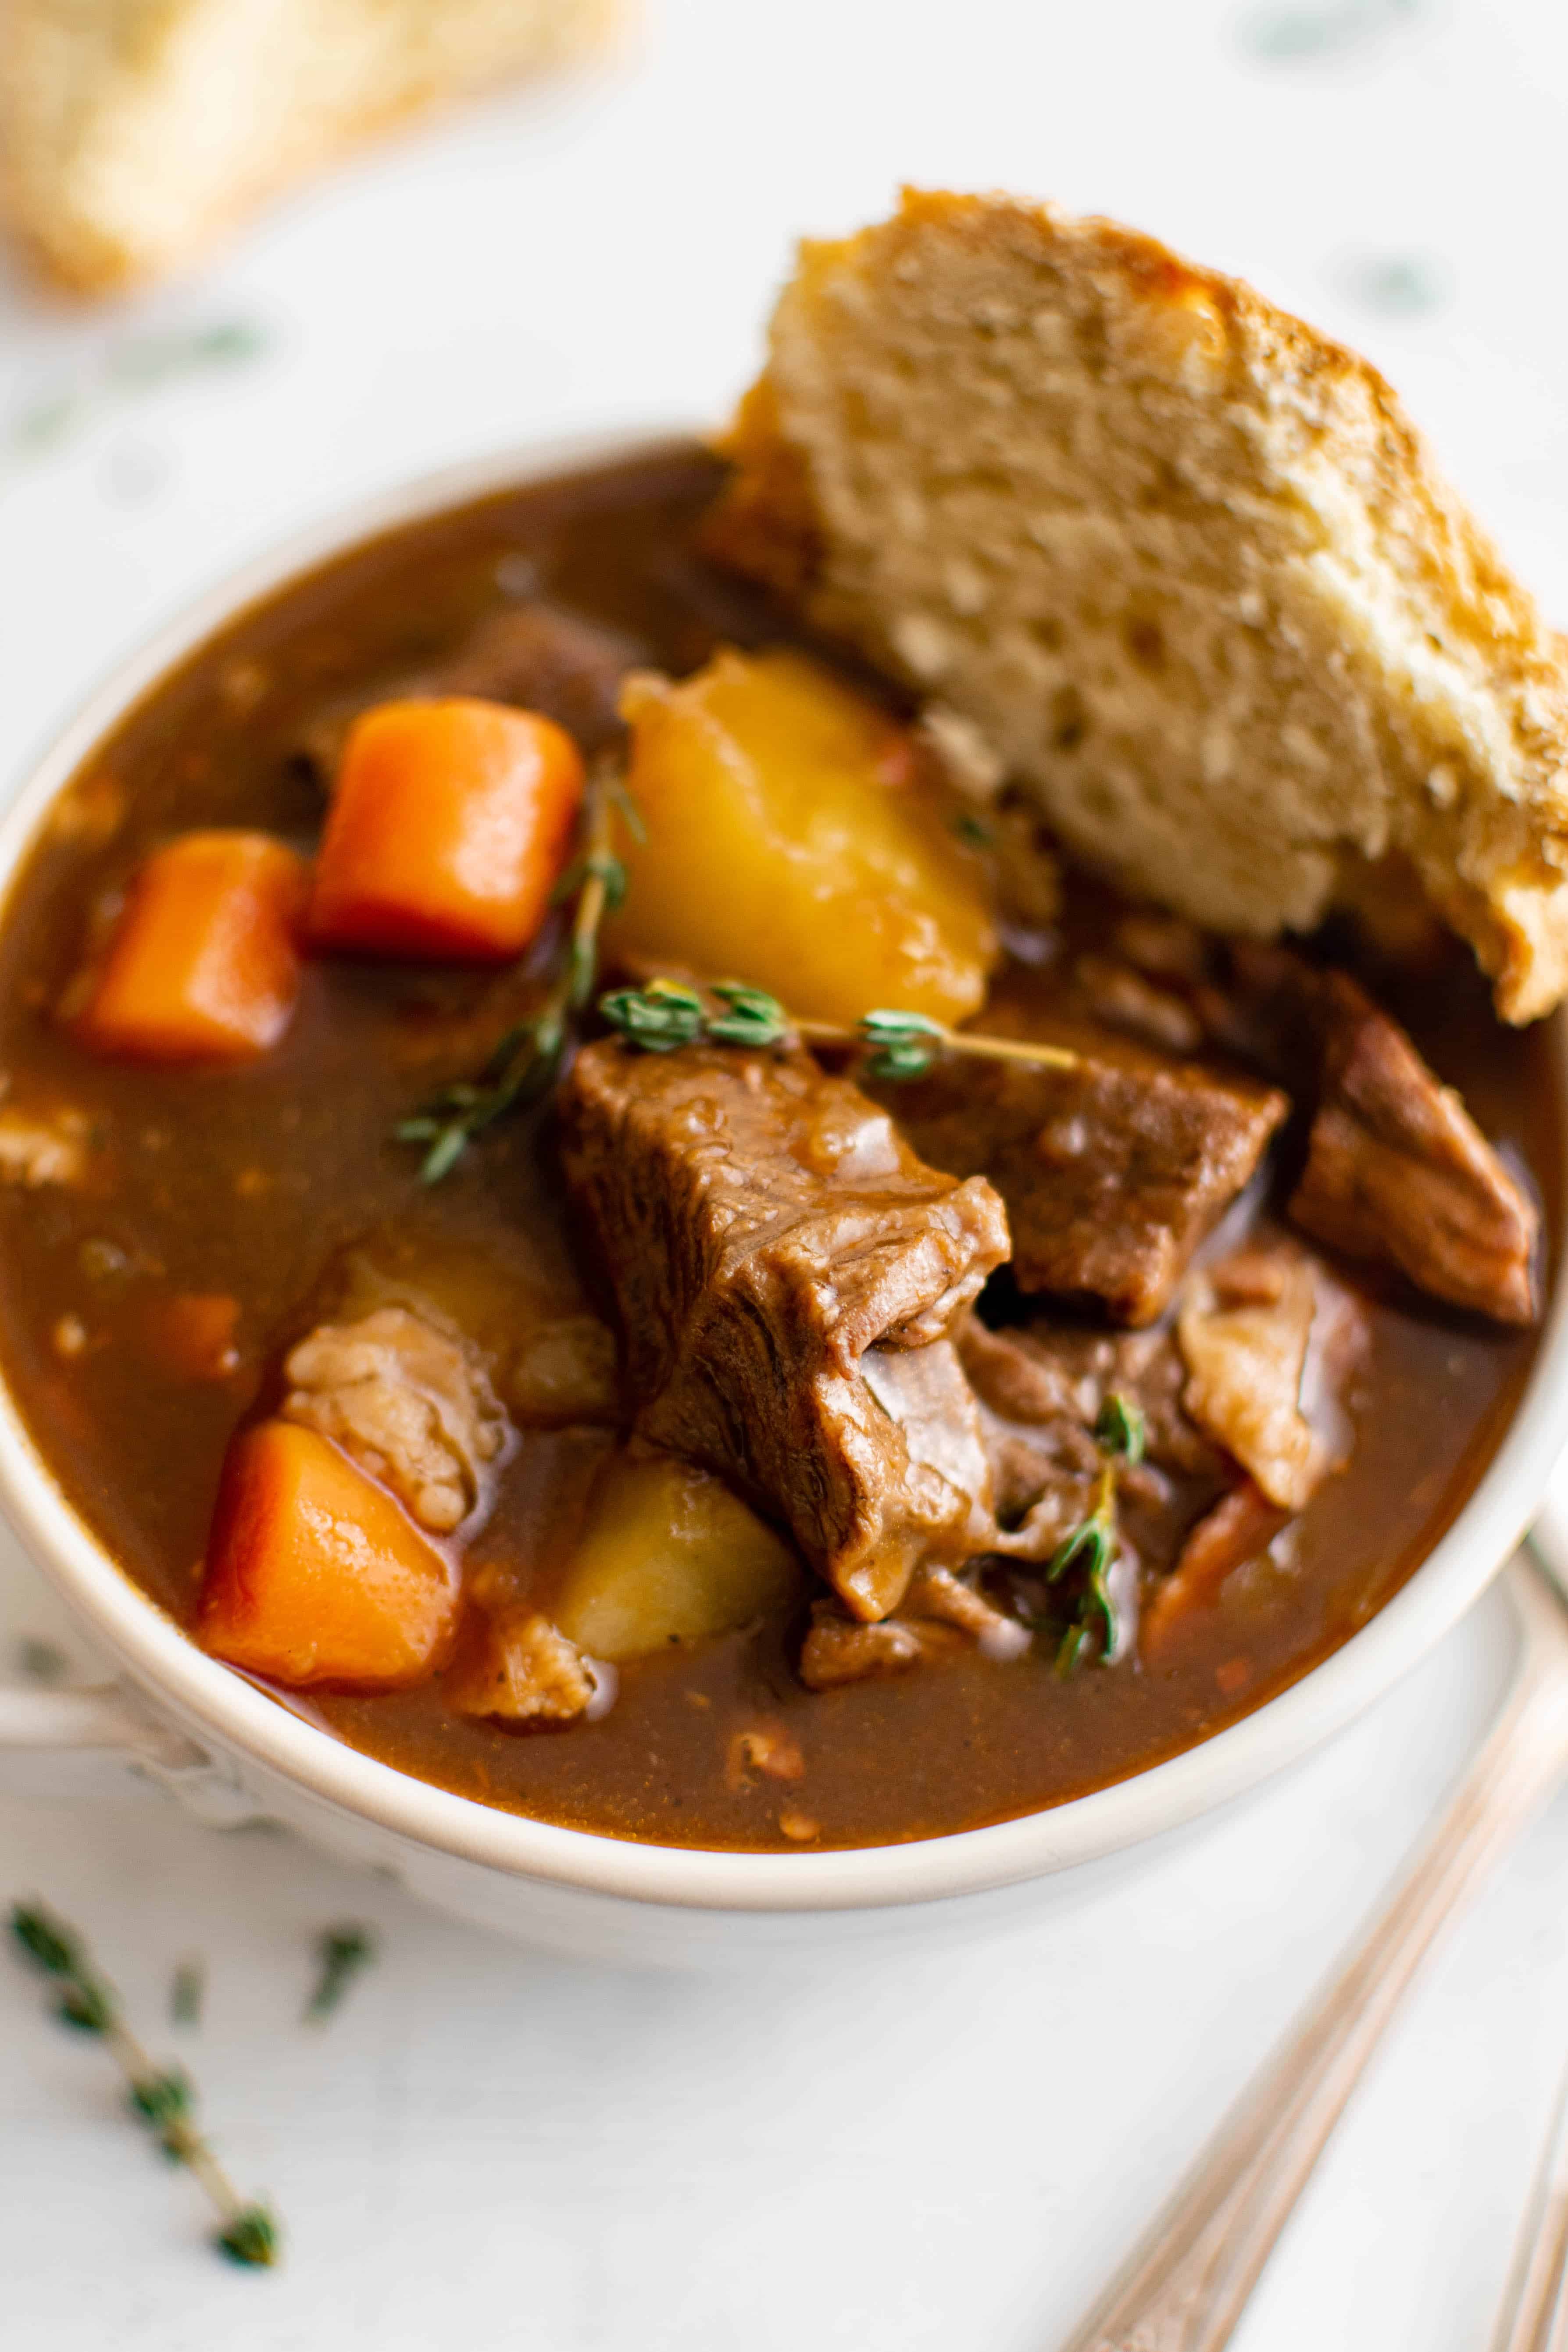 White soup bowl filled with Guinness beef stew filled with chunks of beef, potatoes, carrots, and served with a side of rustic bread.